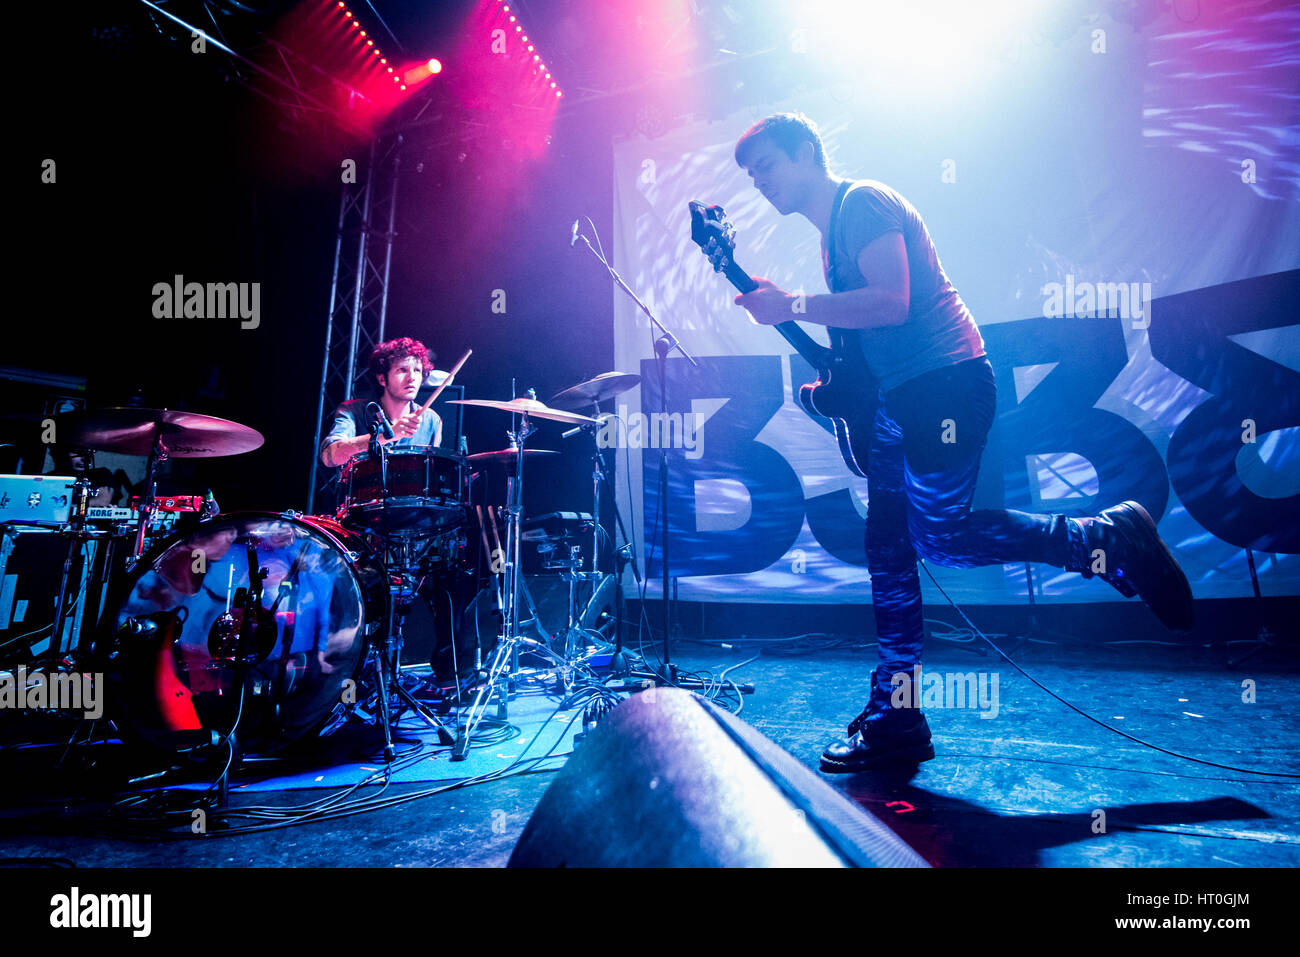 February 6, 2015: The Bud Spencer Blues Explosion band performing live at the Hiroshima Mon Amour Club in Torino.  Photo: Cronos/Alessandro Bosio Stock Photo